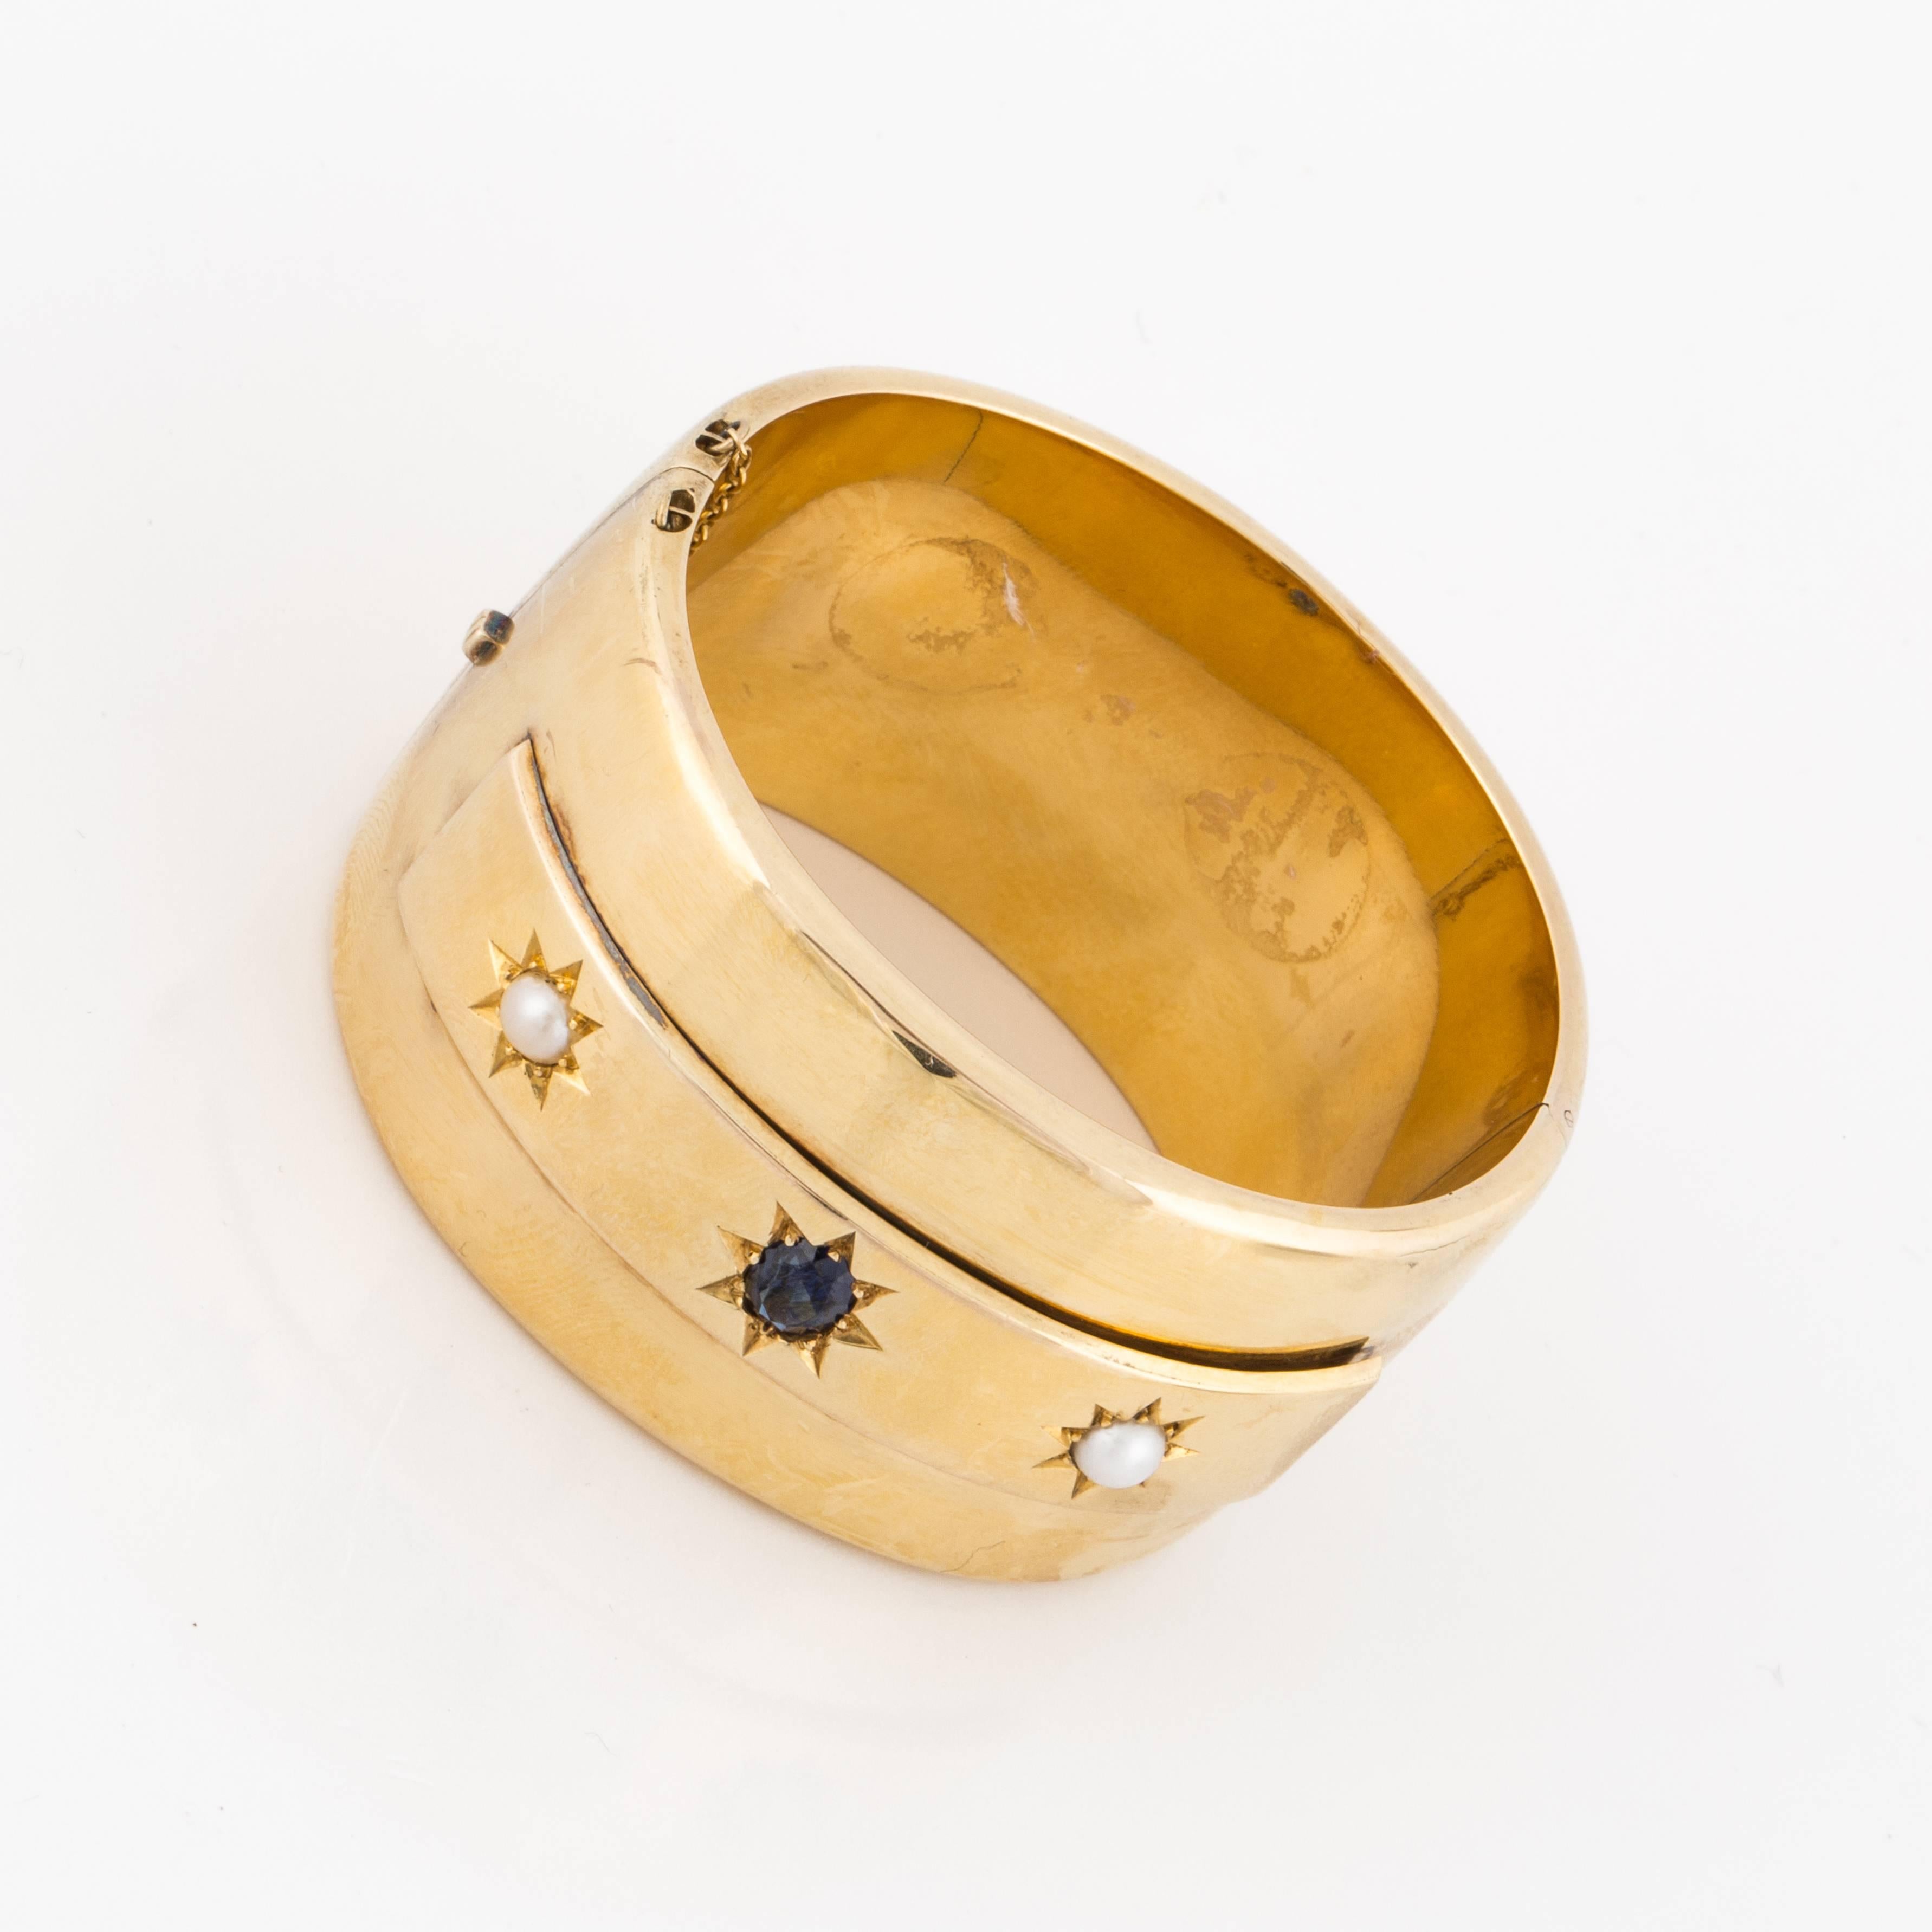 14K yellow gold wide bangle bracelet.  It has a smooth shiny polish and features an oval sapphire in the center with a pearl set on each side in a starburst design.  Measures 1-3/8